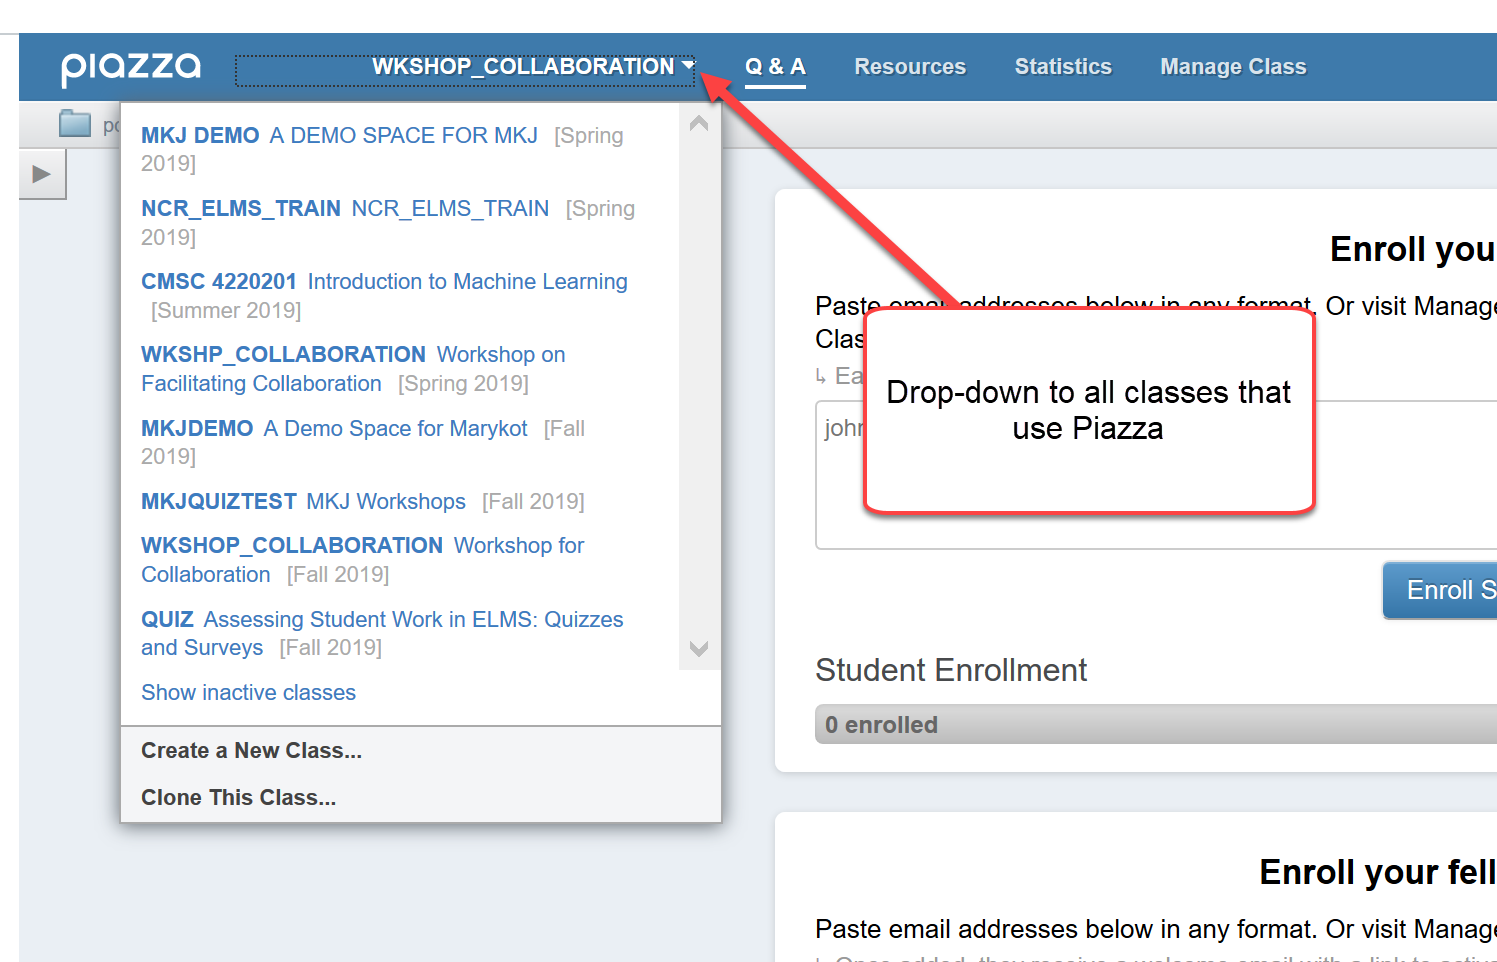 Classes use Piazza